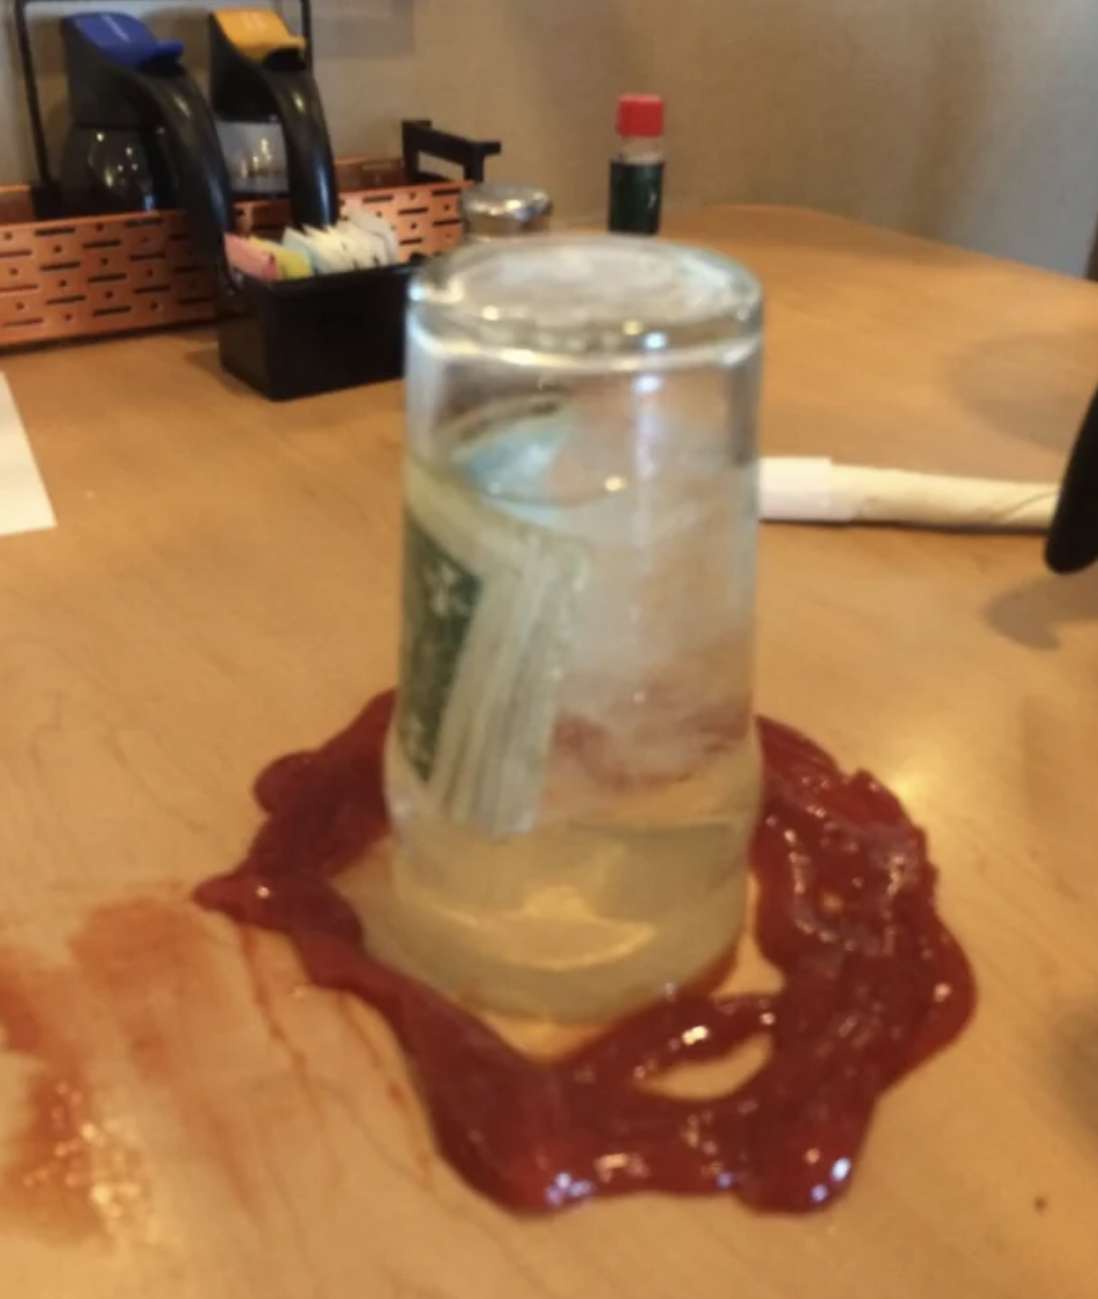 Money in a jar surrounded by ketchup